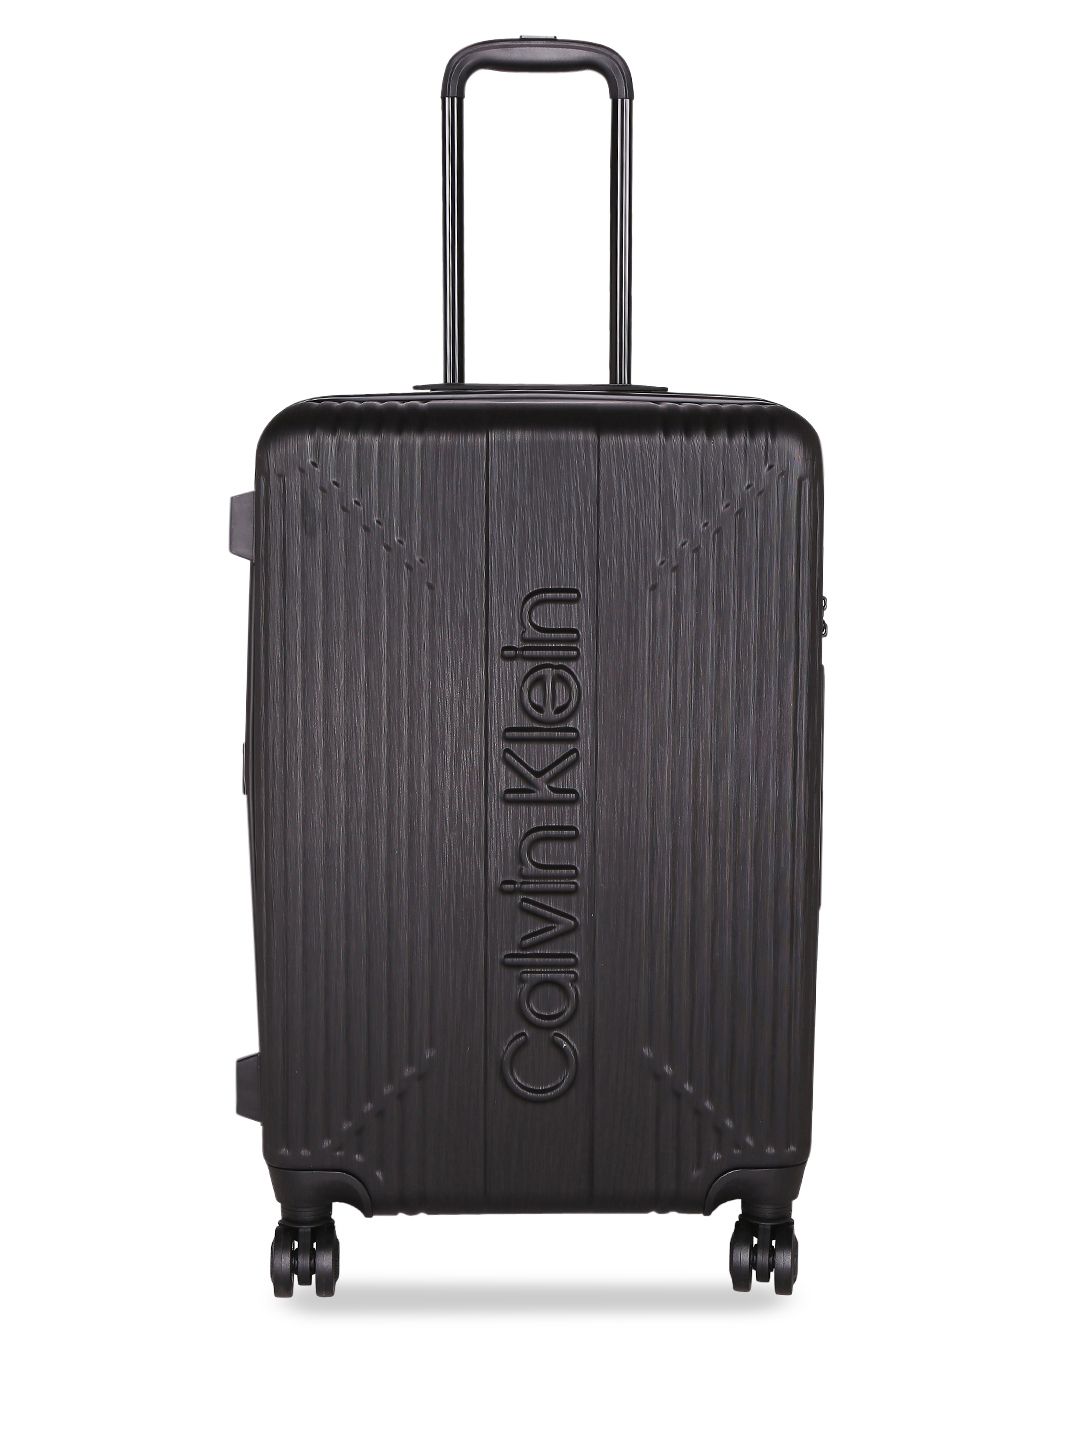 Calvin Klein Black Solid The Standard HS Hard-Sided Cabin Trolley Suitcase Price in India